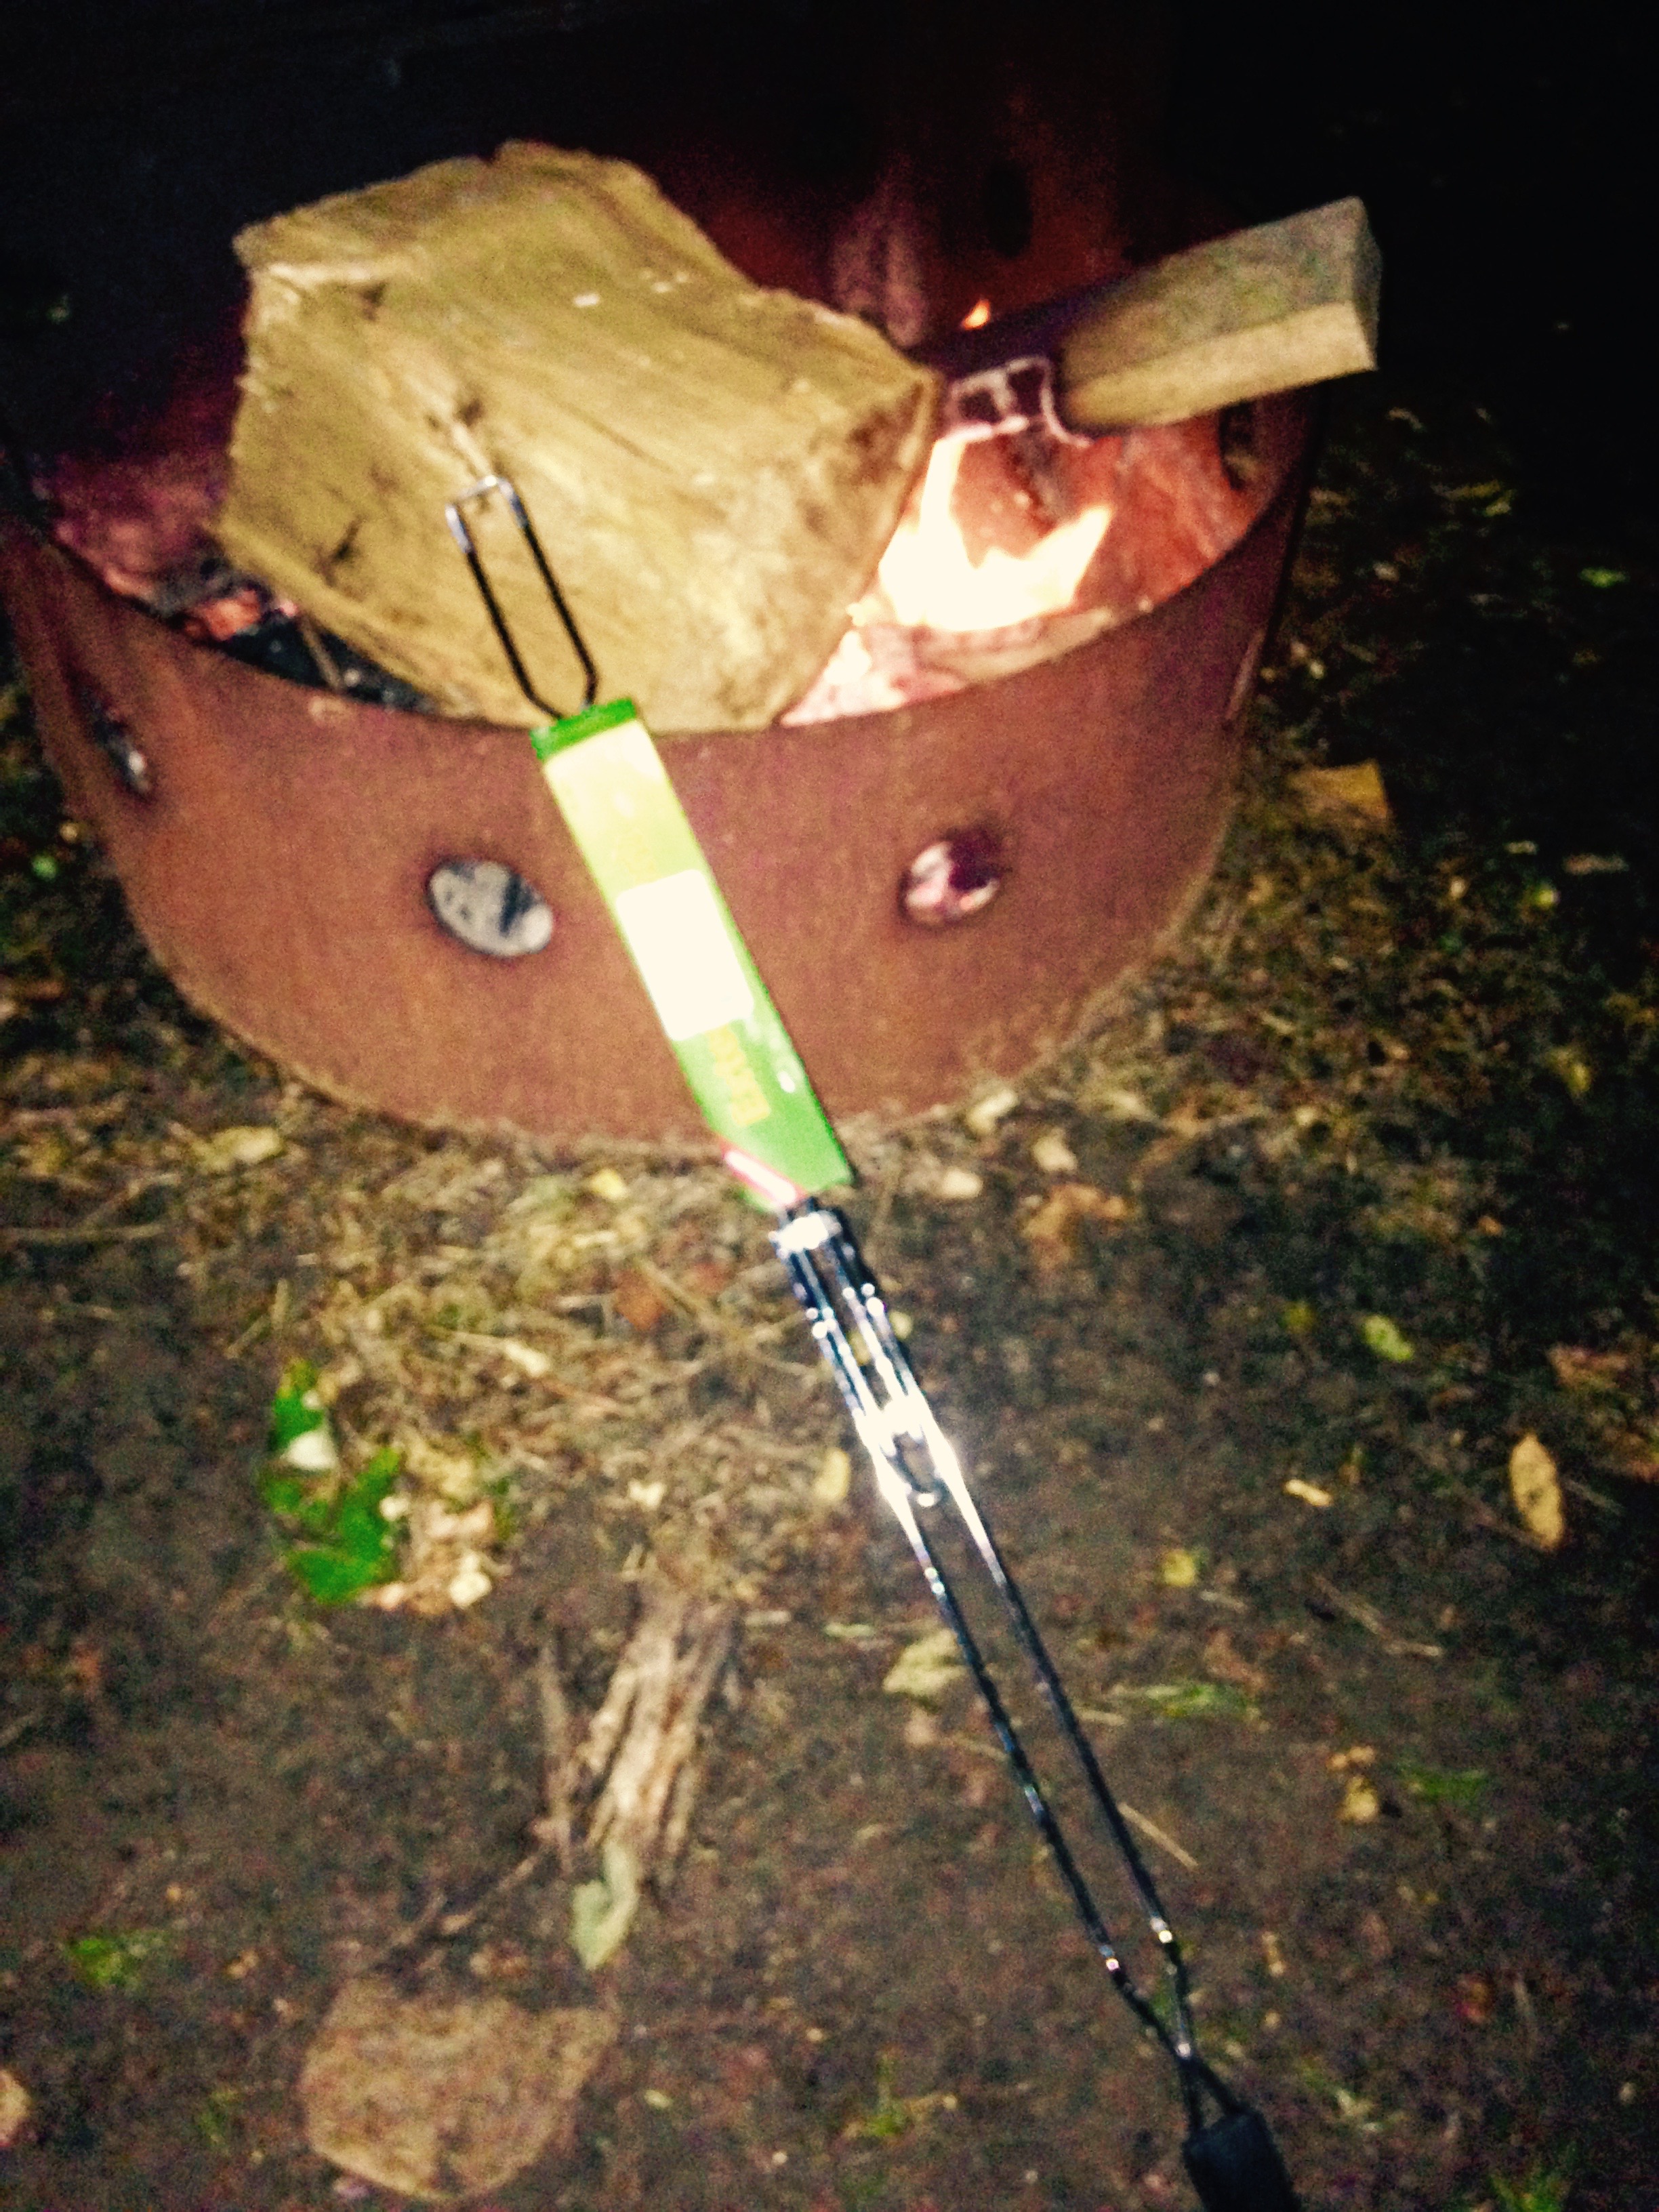 My NEW Coleman roasting stick purchased at the camp store, mine burned up in the fire Friday night accidentally :( 